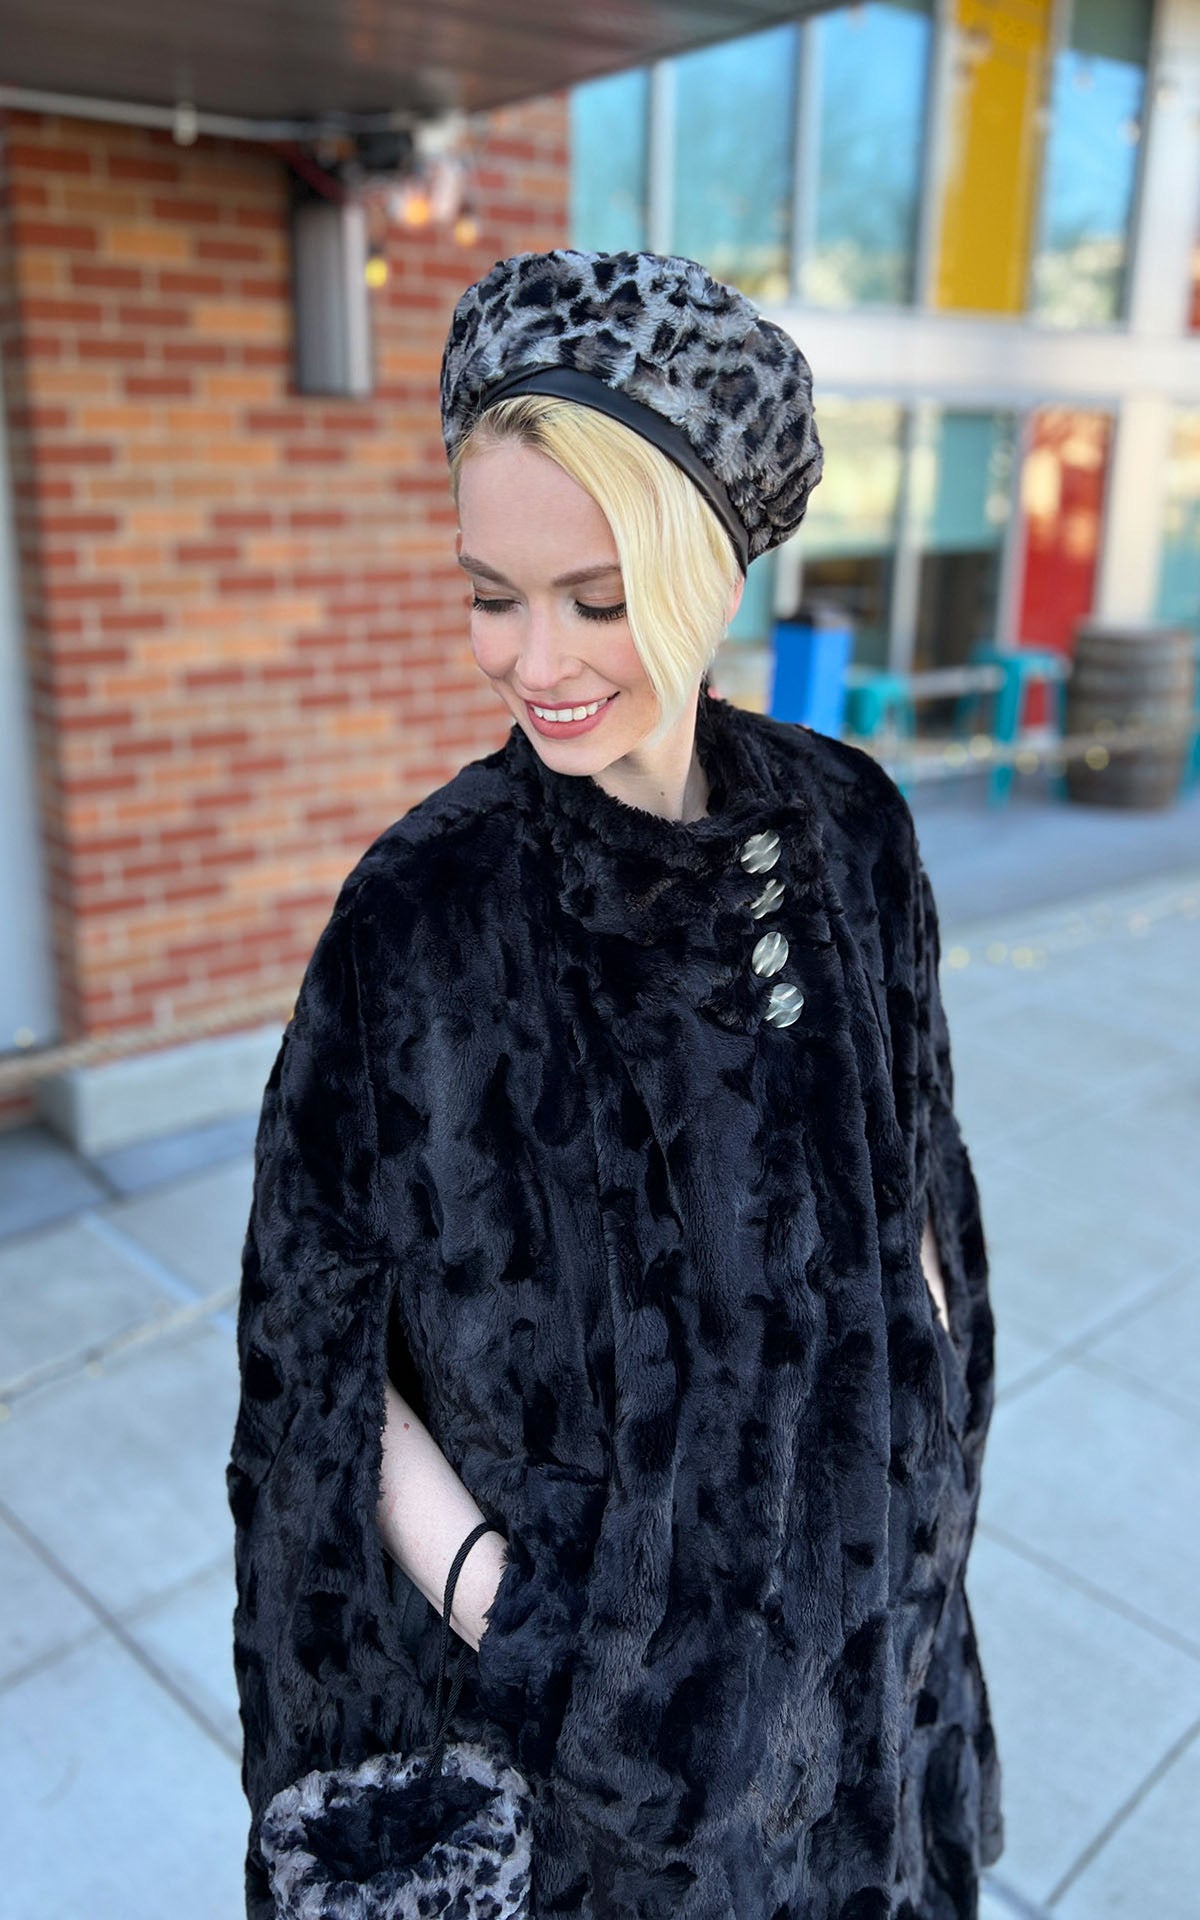 Long Cape with Beret | Cuddly Black Faux Fur with Savannah Cat | Handmade in Seattle WA USA by Pandemonium Millinery